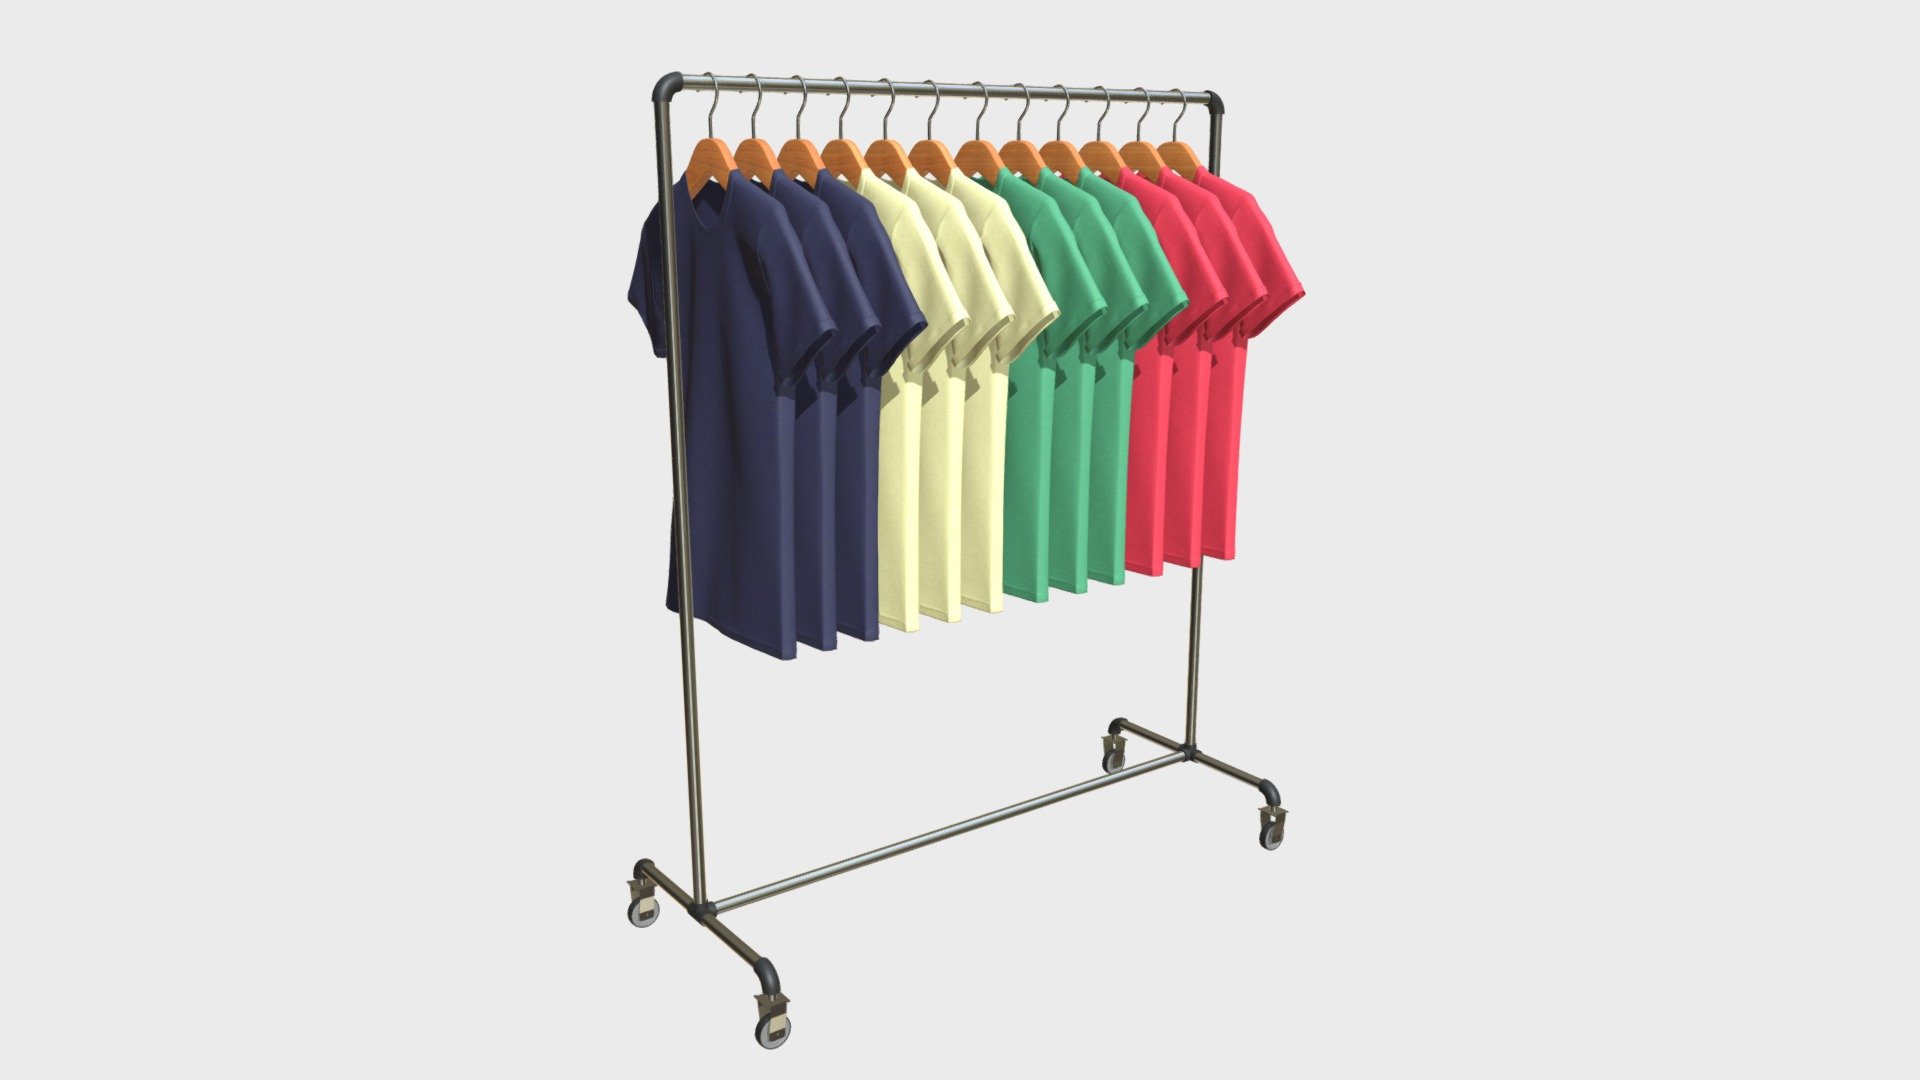 === The following description refers to the additional ZIP package provided with this model ===

Some T-Shirts hanged on a rack 3D Model. Single object, single material; OVERLAPPING UV Layout map, with a PBR Textures set. Production-ready 3D Model, with PBR materials, textures, overlapping UV Layout map provided in the package.

Quads only geometries (no tris/ngons).

Formats included: FBX, OBJ; scenes: BLEND (with Cycles / Eevee PBR Materials and Textures); other: png with Alpha.

1 Object (mesh), 1 PBR Material, UV unwrapped (overlapping UV Layout map provided in the package); UV-mapped Textures.

UV Layout maps and Image Textures resolutions: 2048x2048; PBR Textures made with Substance Painter.

Polygonal, QUADS ONLY (no tris/ngons); 183444 vertices, 182980 quad faces (365960 tris).

Real world dimensions; scene scale units: cm in Blender 3.3 (that is: Metric with 0.01 scale).

Uniform scale object (scale applied in Blender 3.3) 3d model